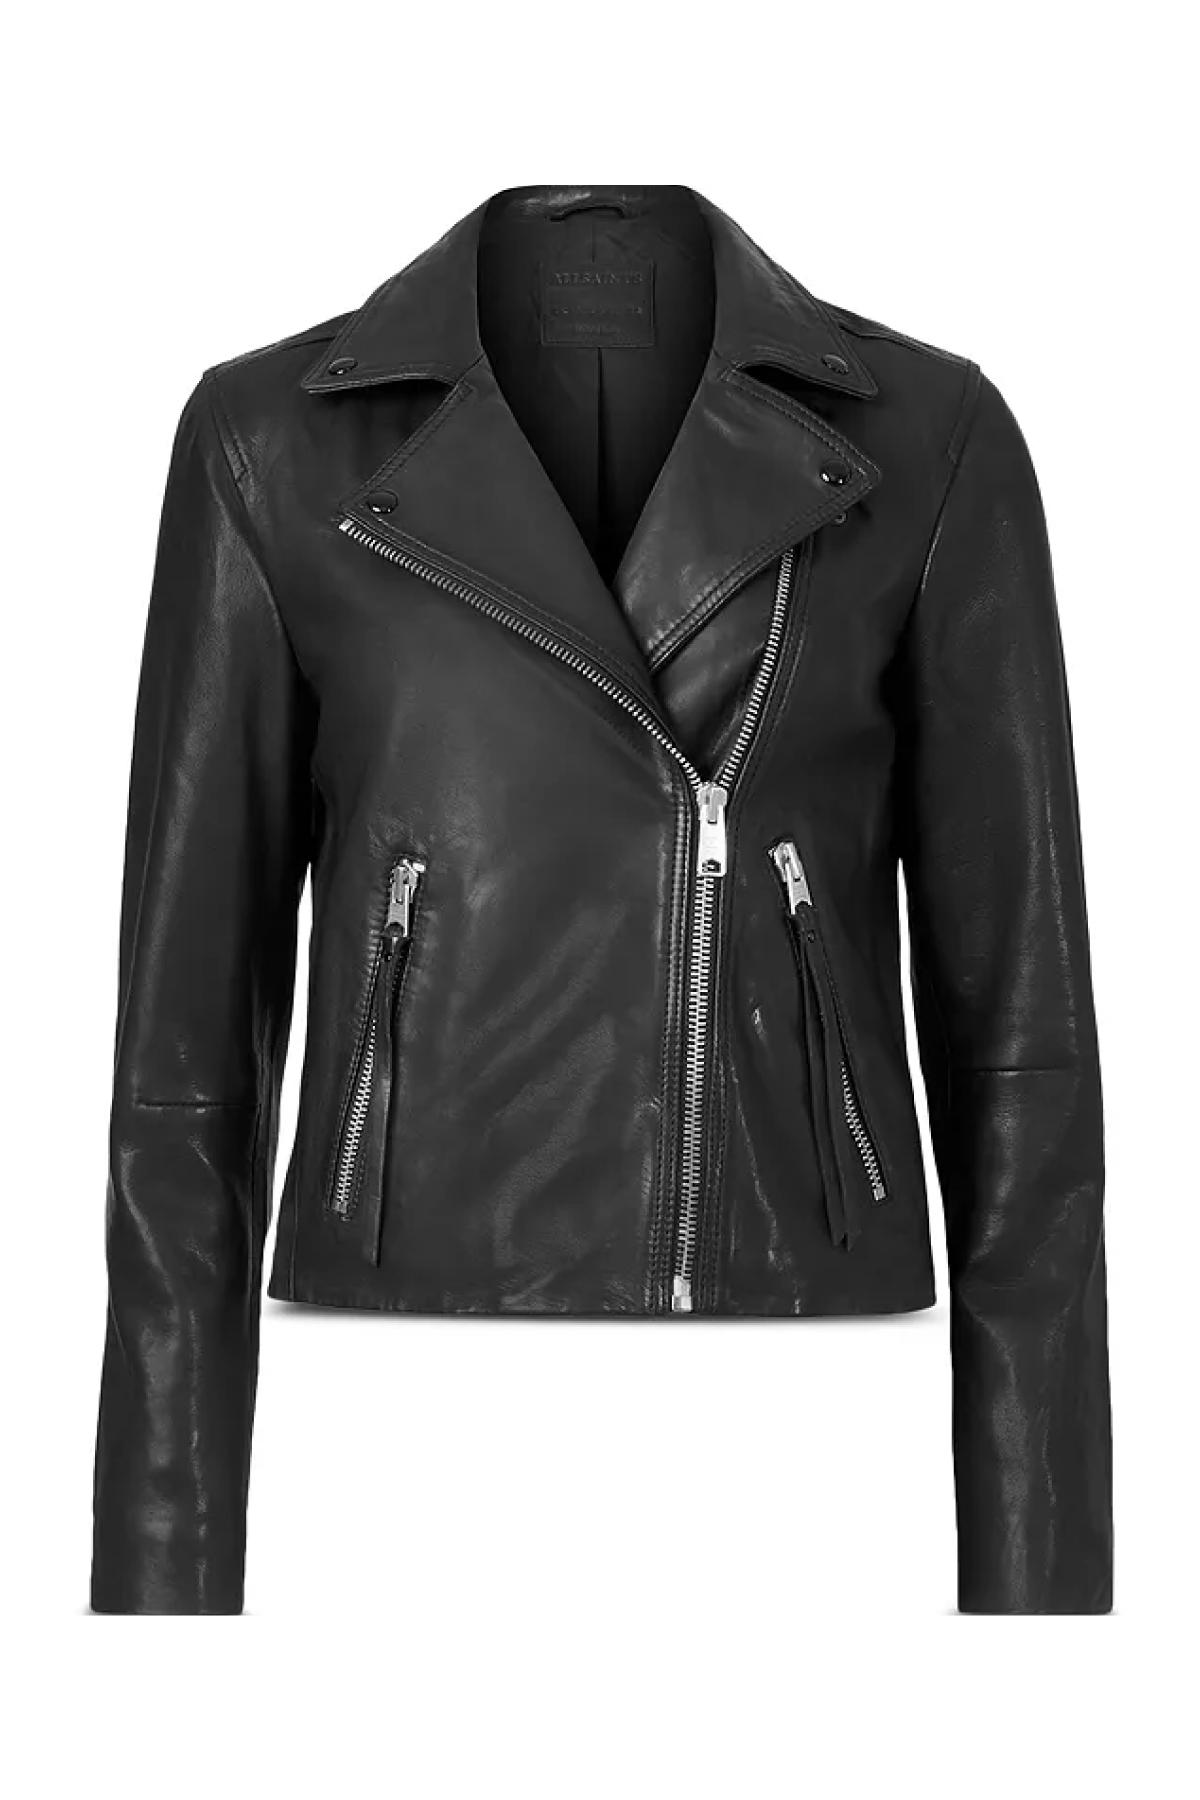 Michael Kors Vintage Style Leather Jacket  Jackets  Clothing   Accessories  Shop The Exchange